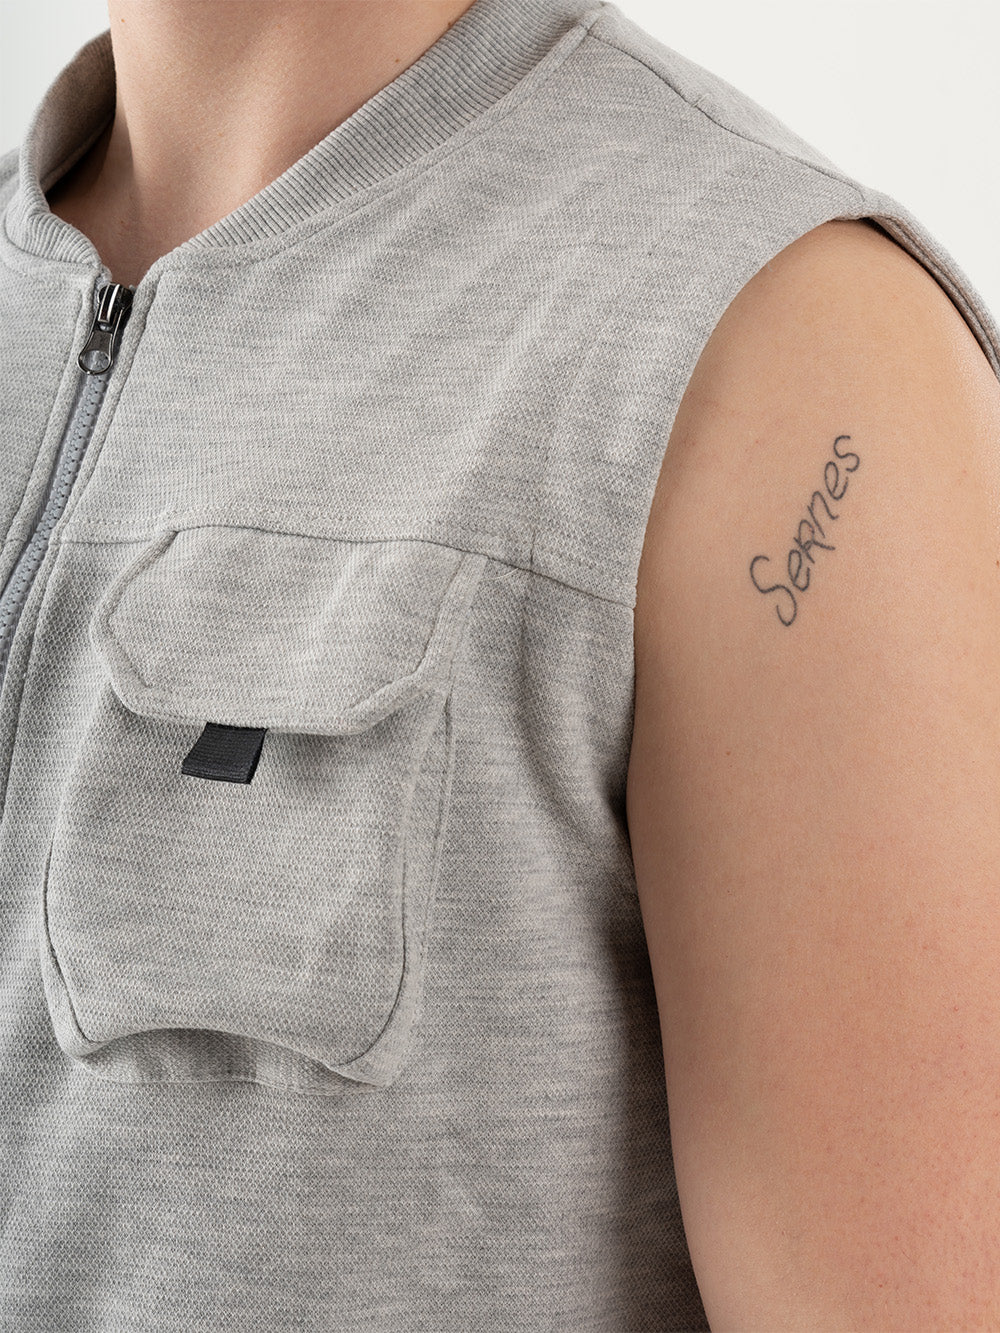 A man wearing a FREESPIRIT VEST with cargo pockets and a tattoo on his arm.